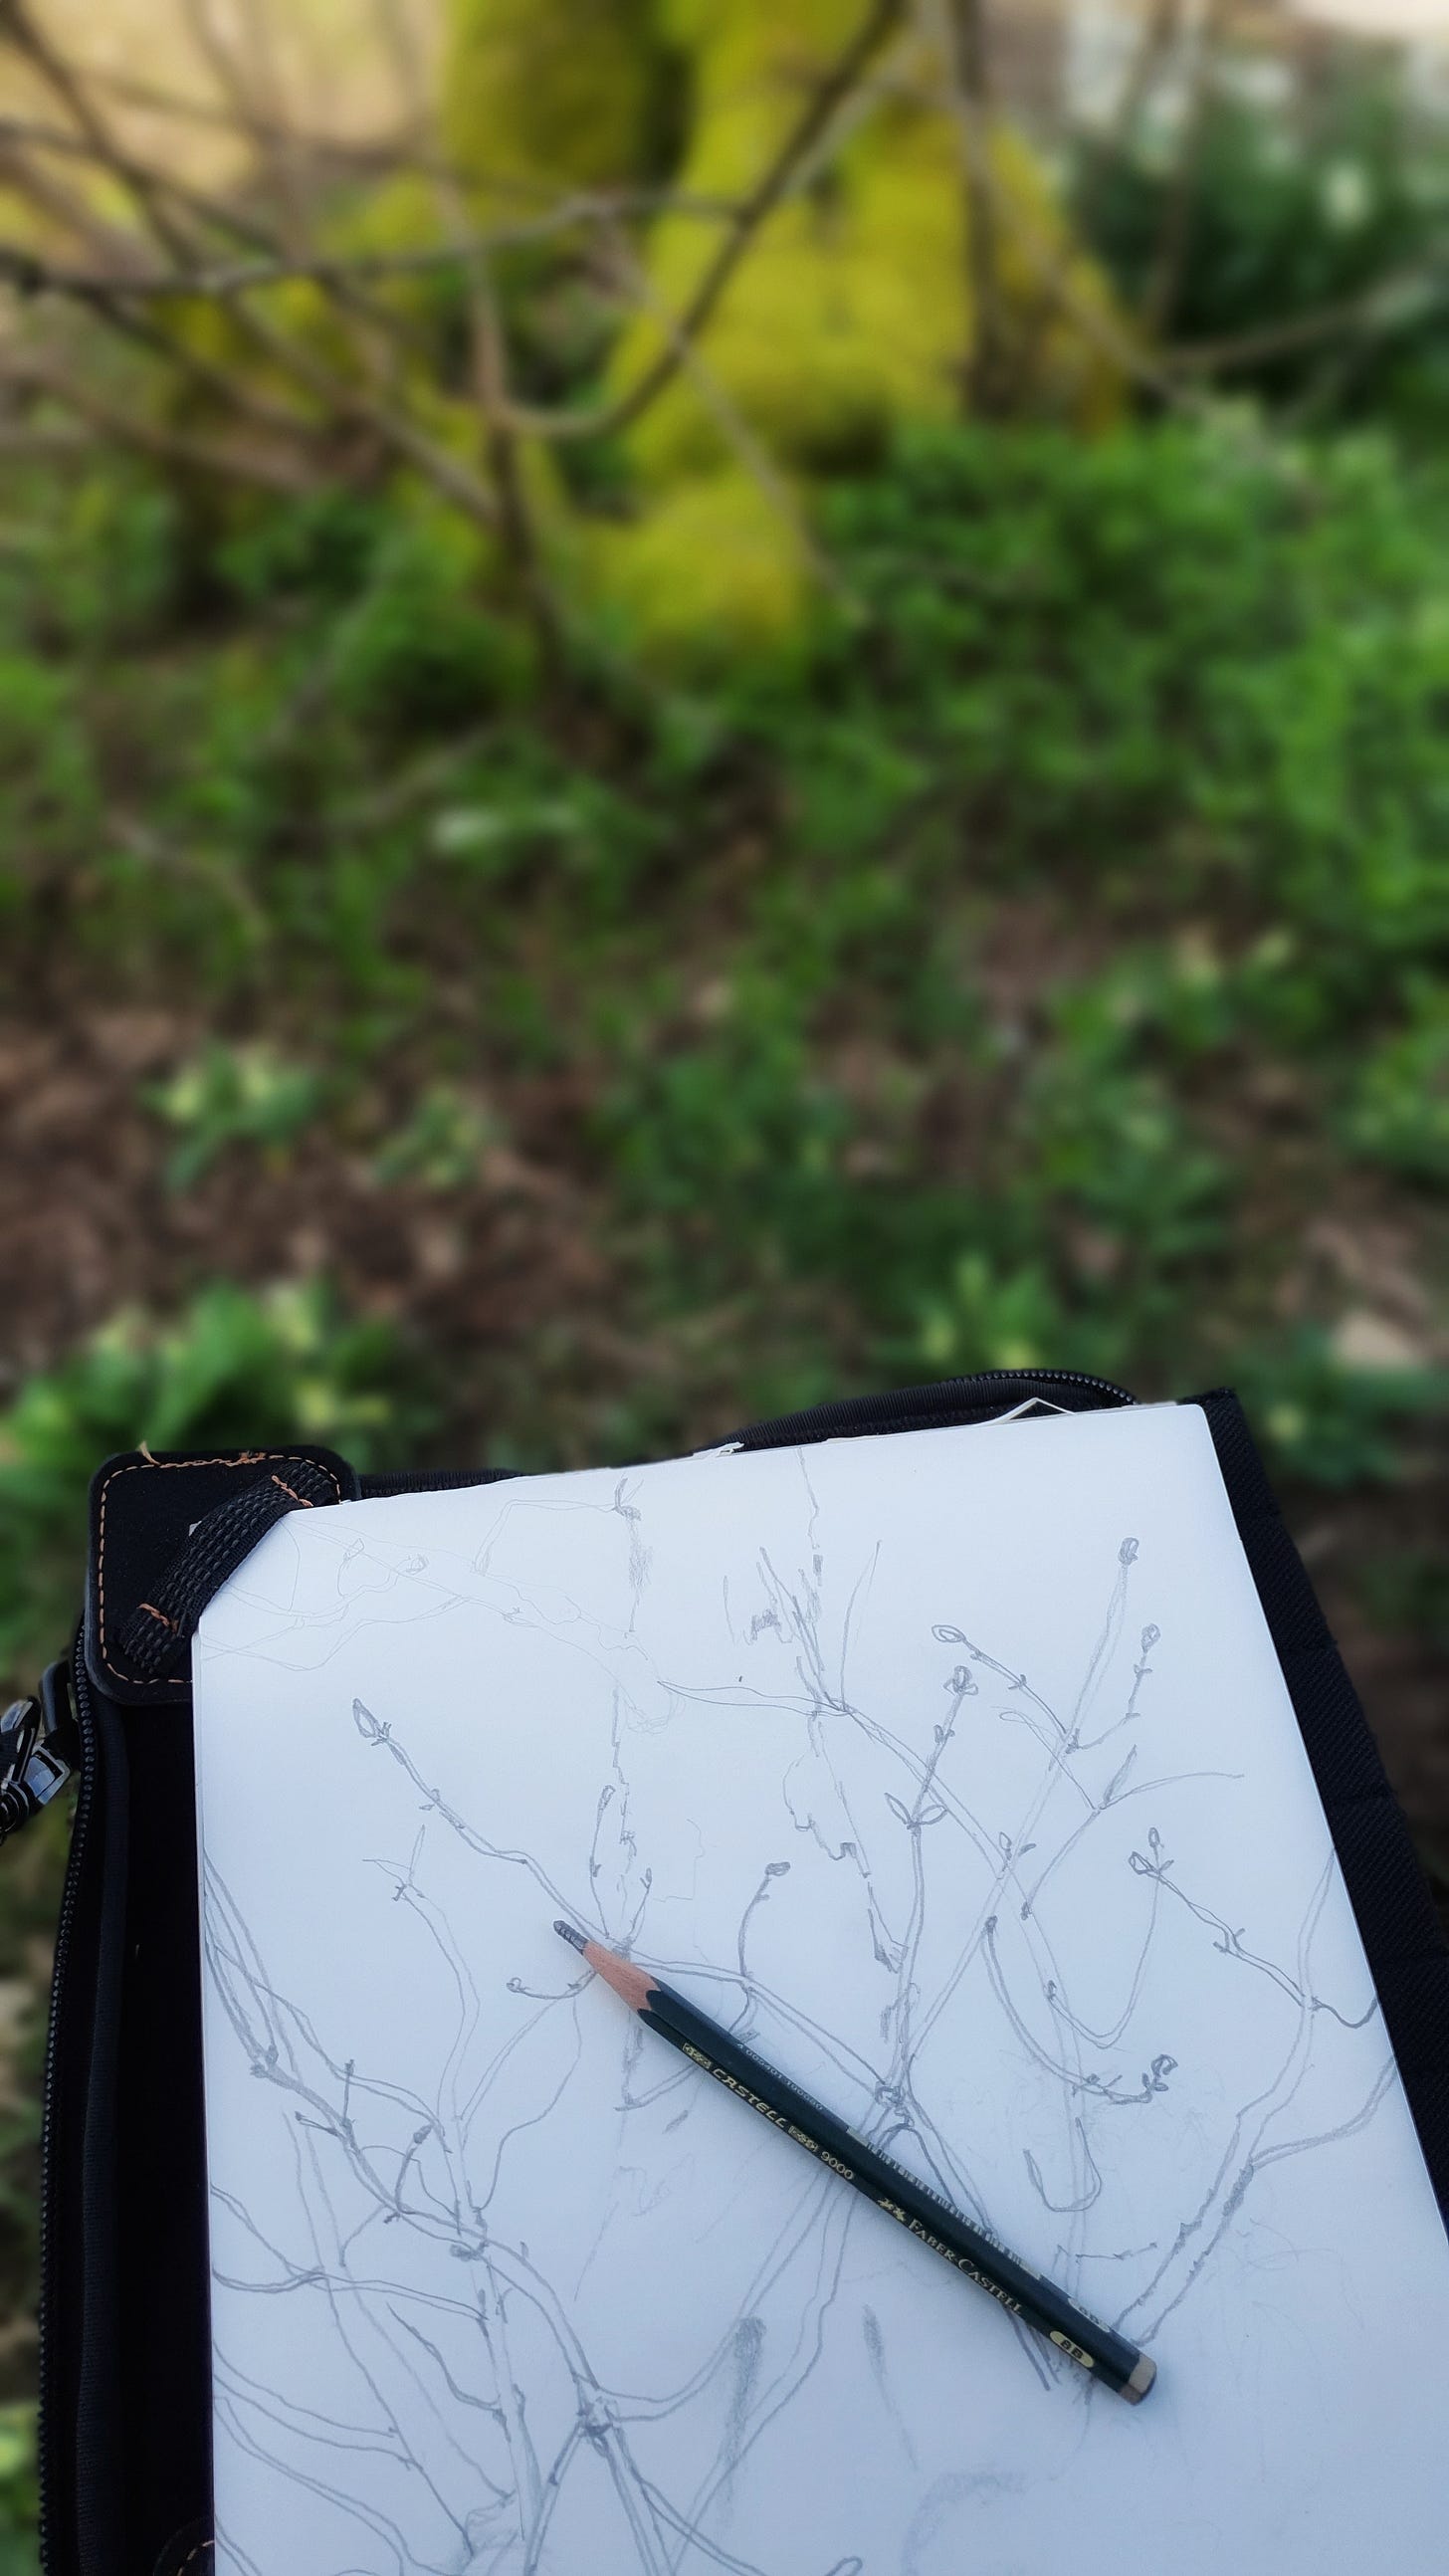 A sketchbook and a pencil sketching a tree outside